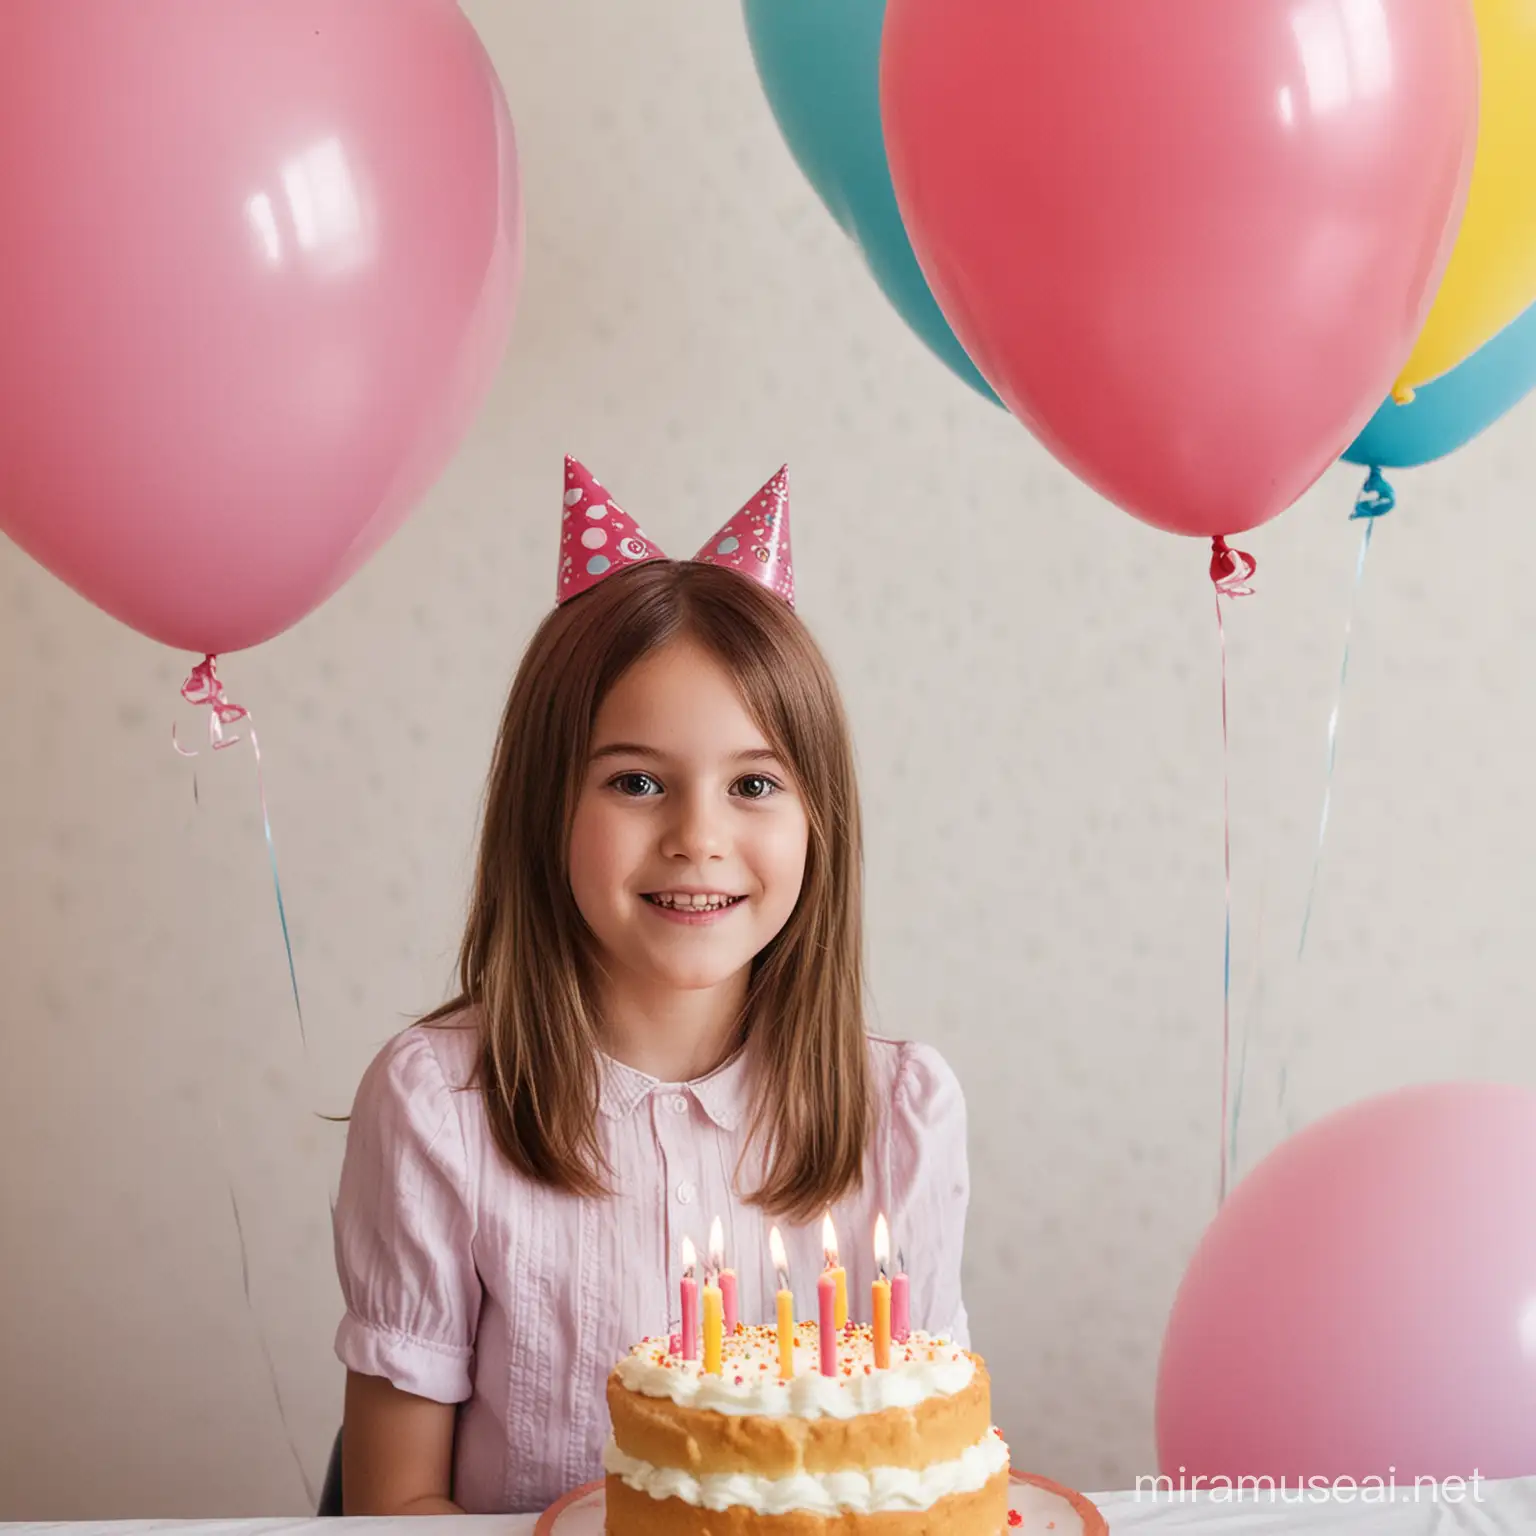 Girl Celebrating Birthday with Cake and Balloons Canon 750D Photo